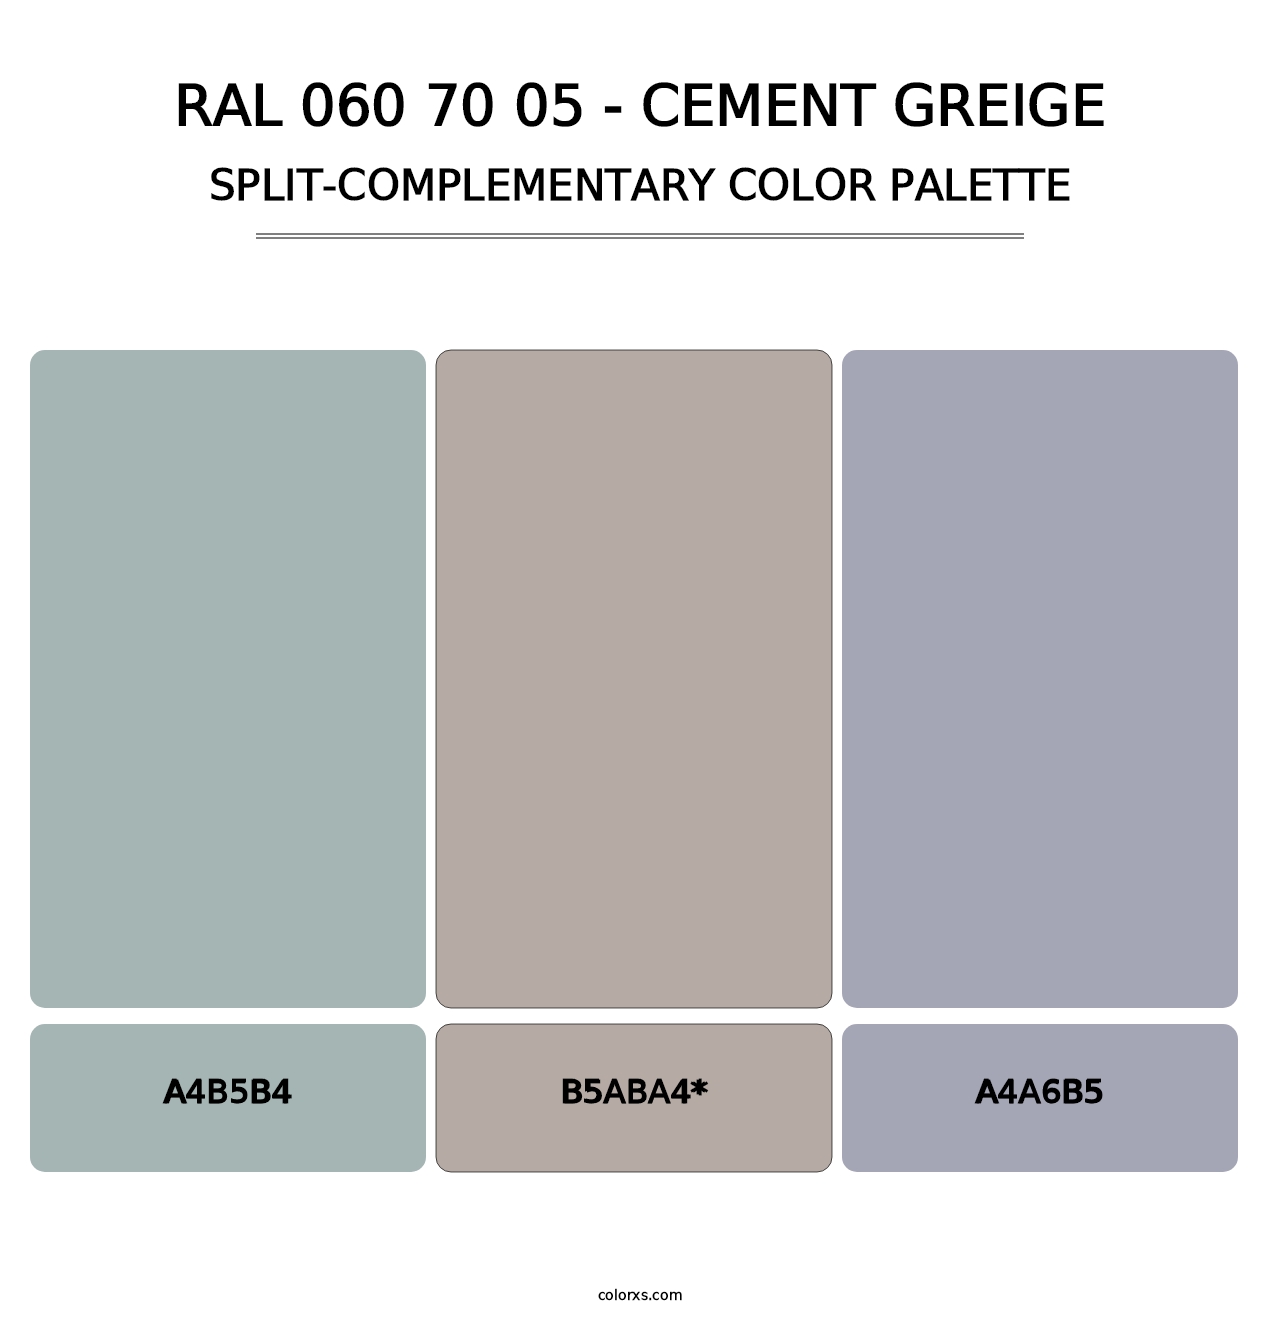 RAL 060 70 05 - Cement Greige - Split-Complementary Color Palette